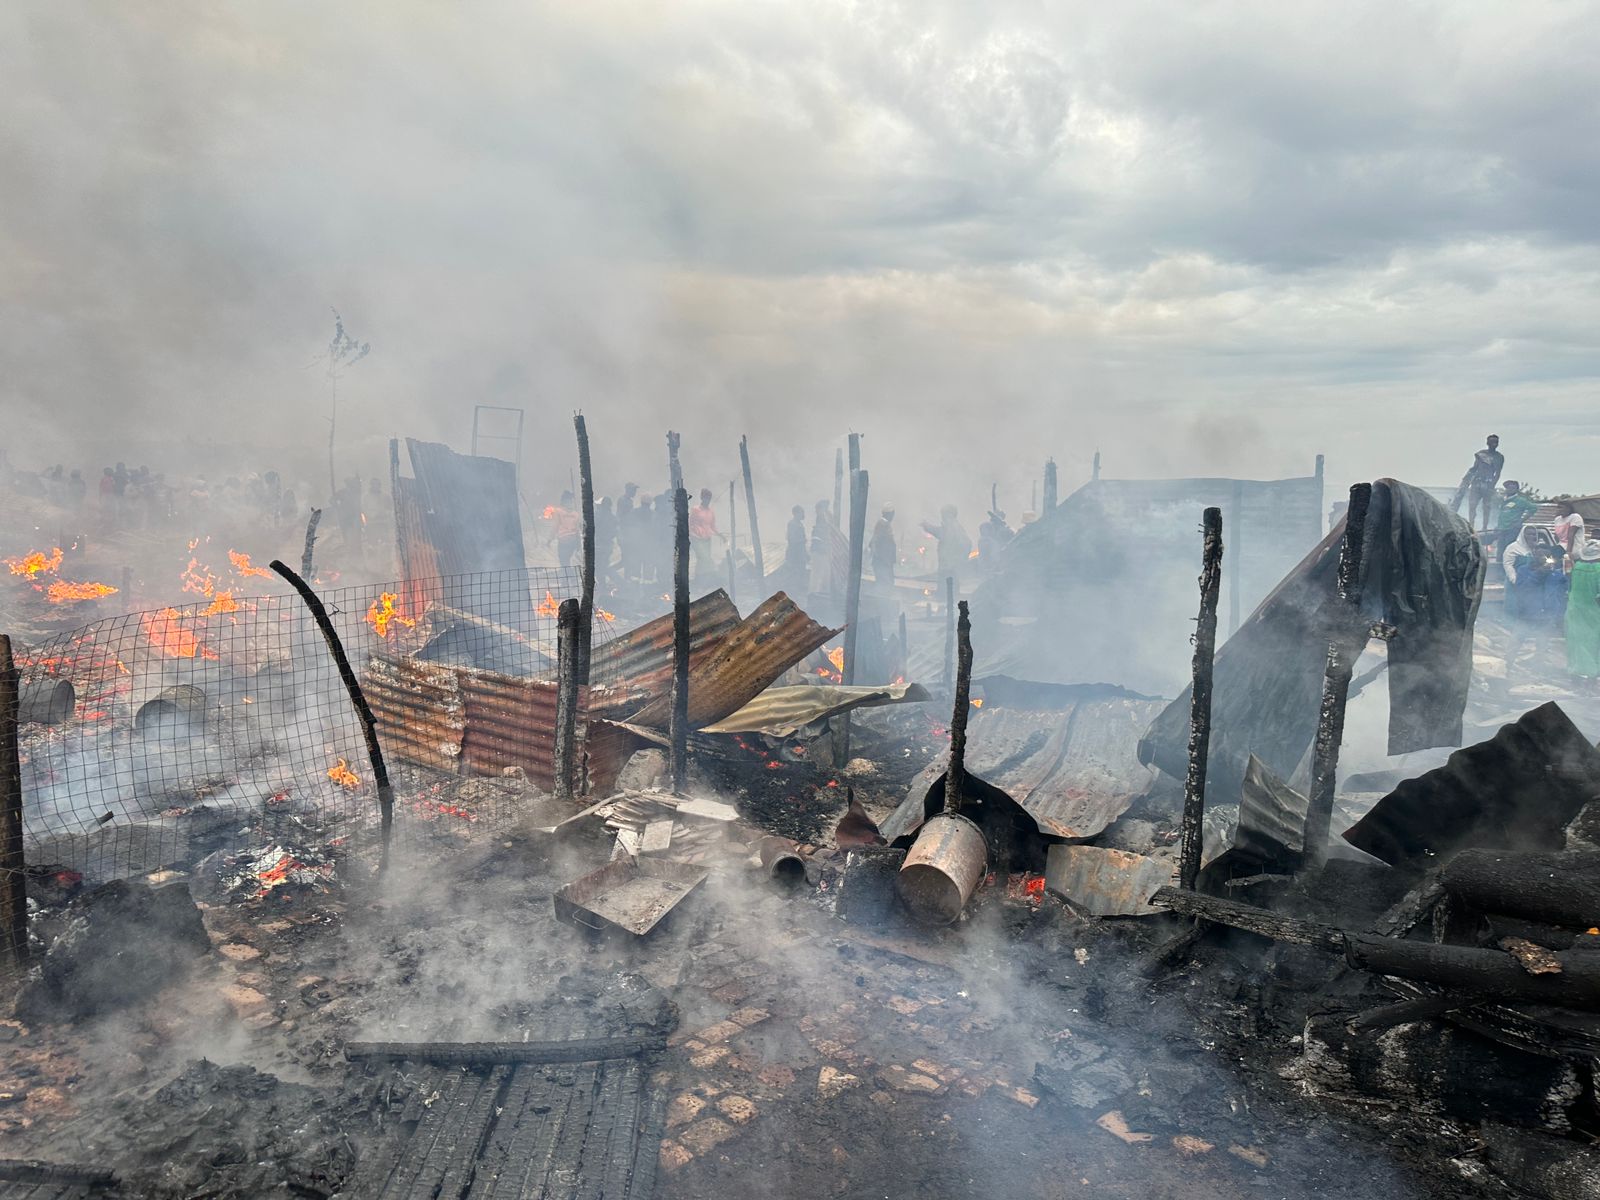 Some of the shacks that gutted by fire in Plastic View Informal Settlement in Centurion Tshwane